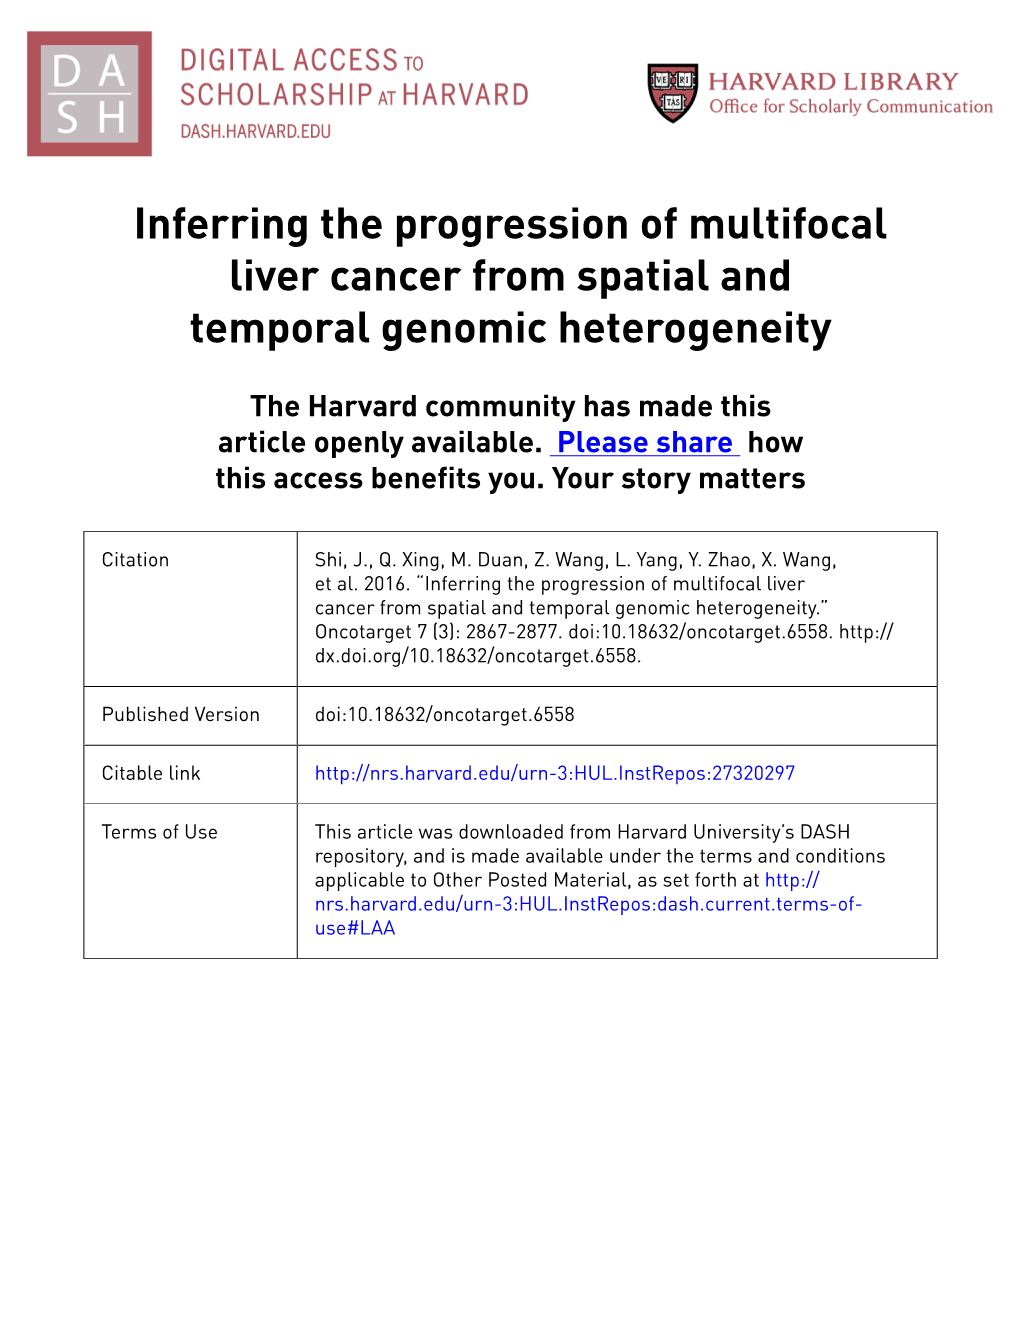 Inferring the Progression of Multifocal Liver Cancer from Spatial and Temporal Genomic Heterogeneity